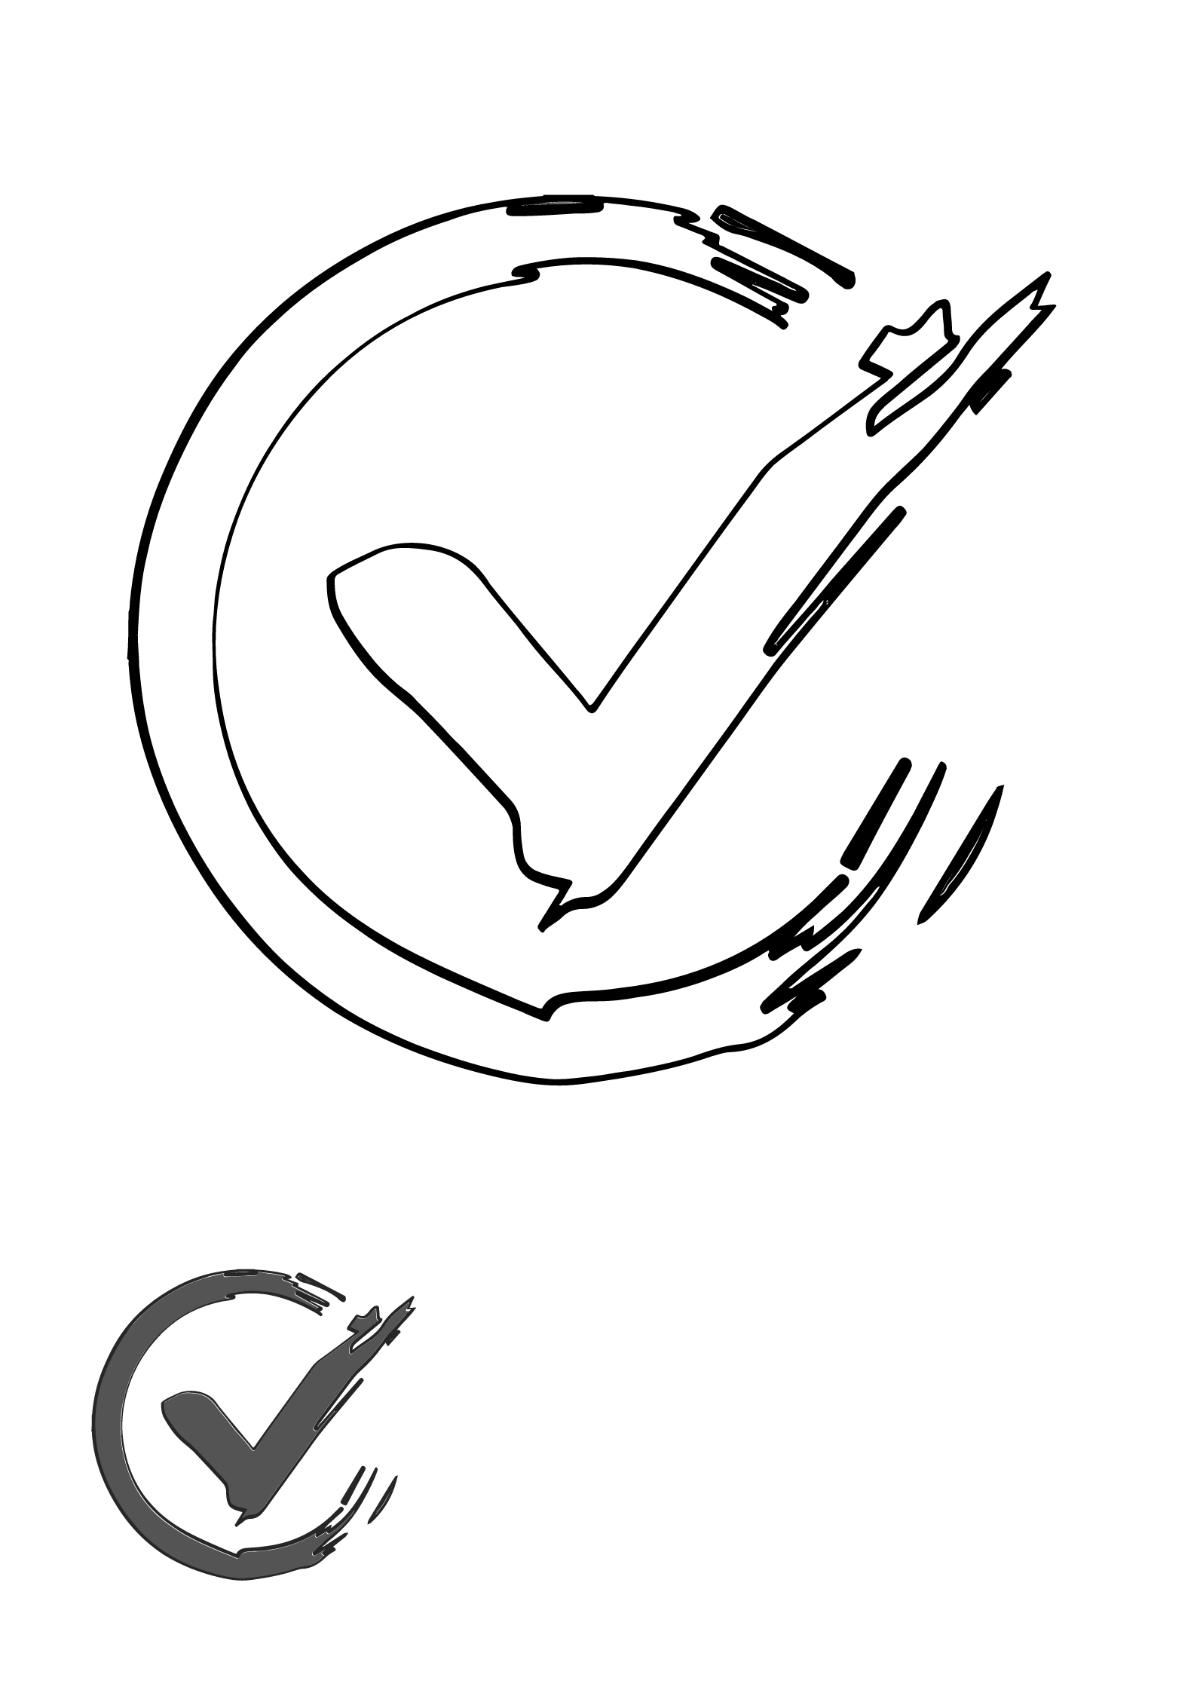 Grunge Check Mark Coloring Page Template